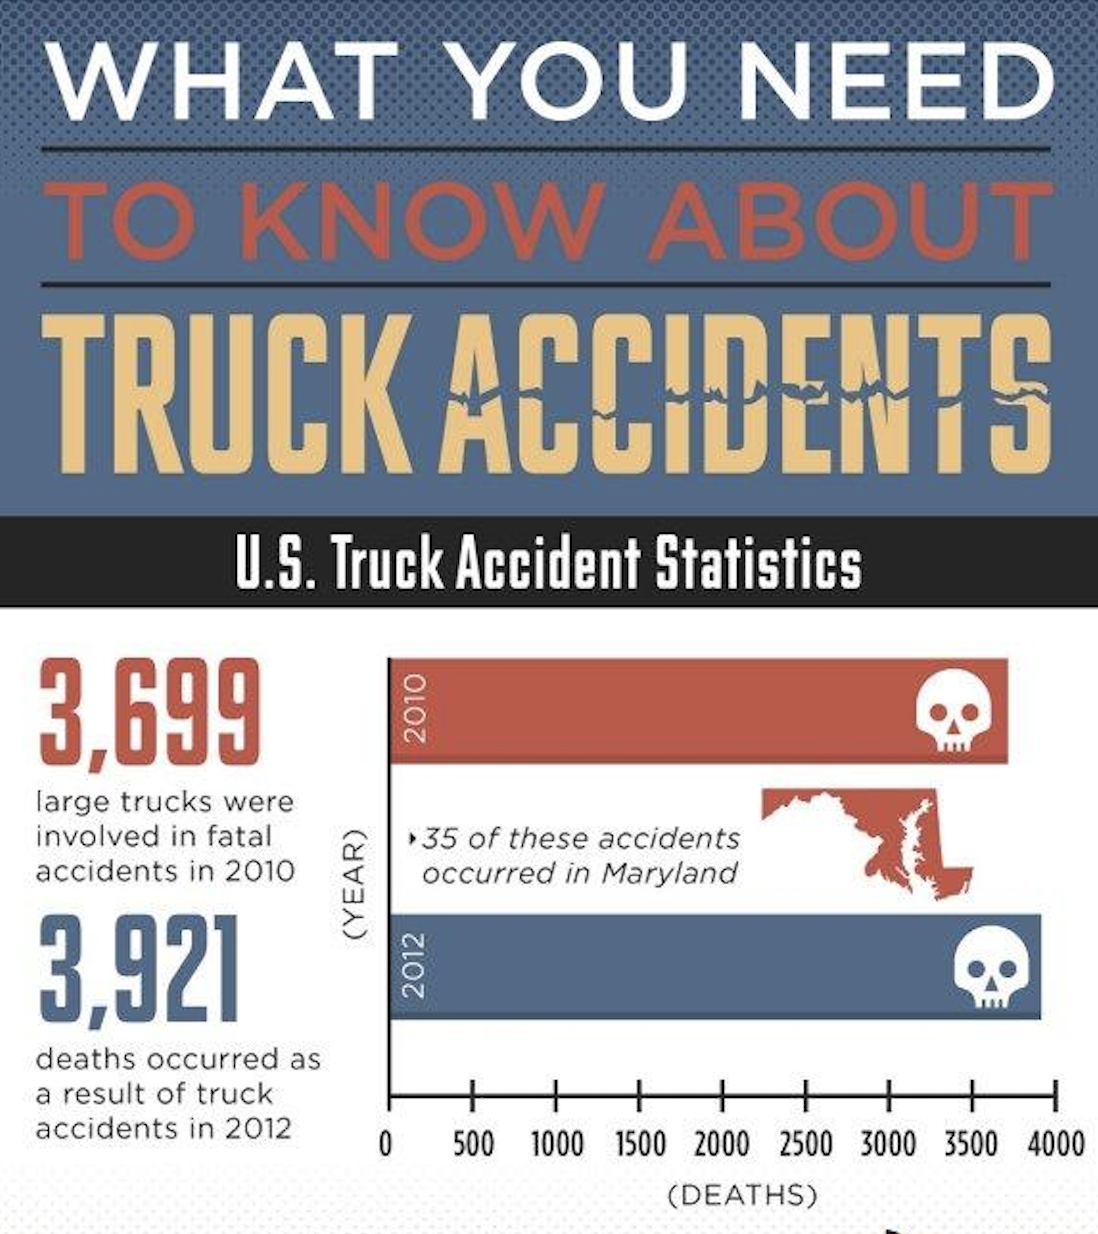 What You Need to Know about Truck Accidents